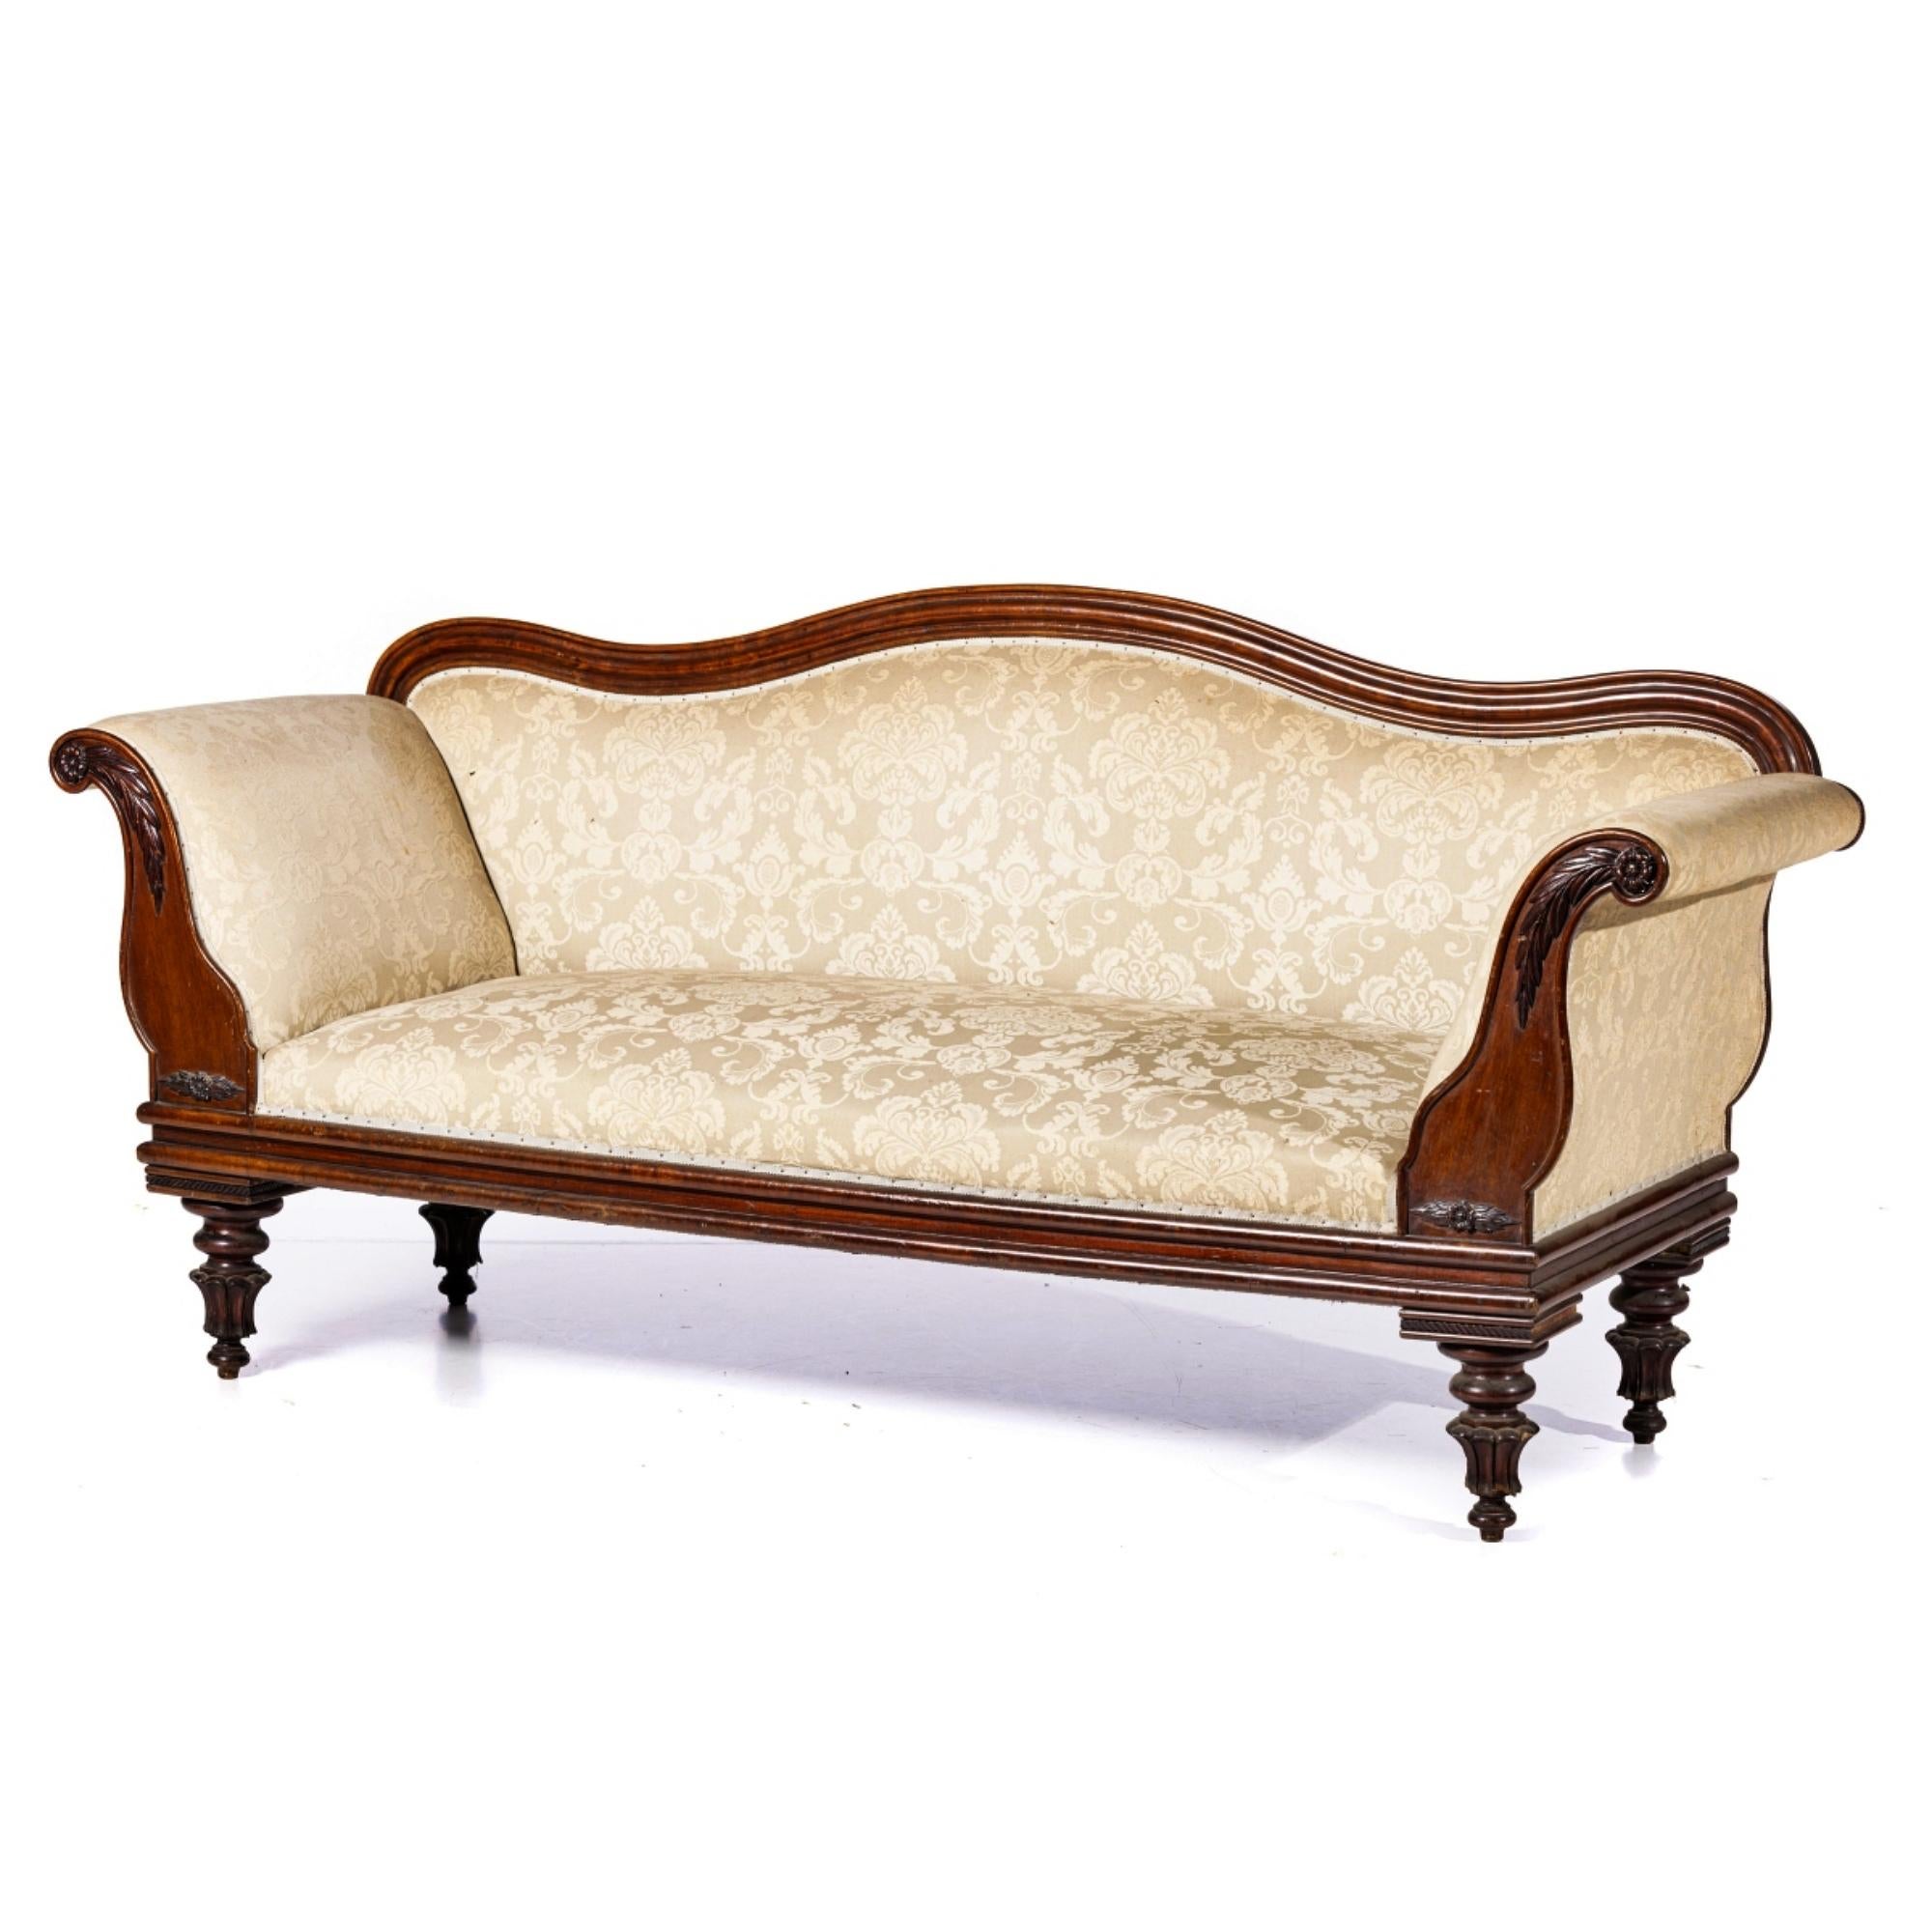 Hand-Crafted Romantic Canape French, 19th Century in Oilwood